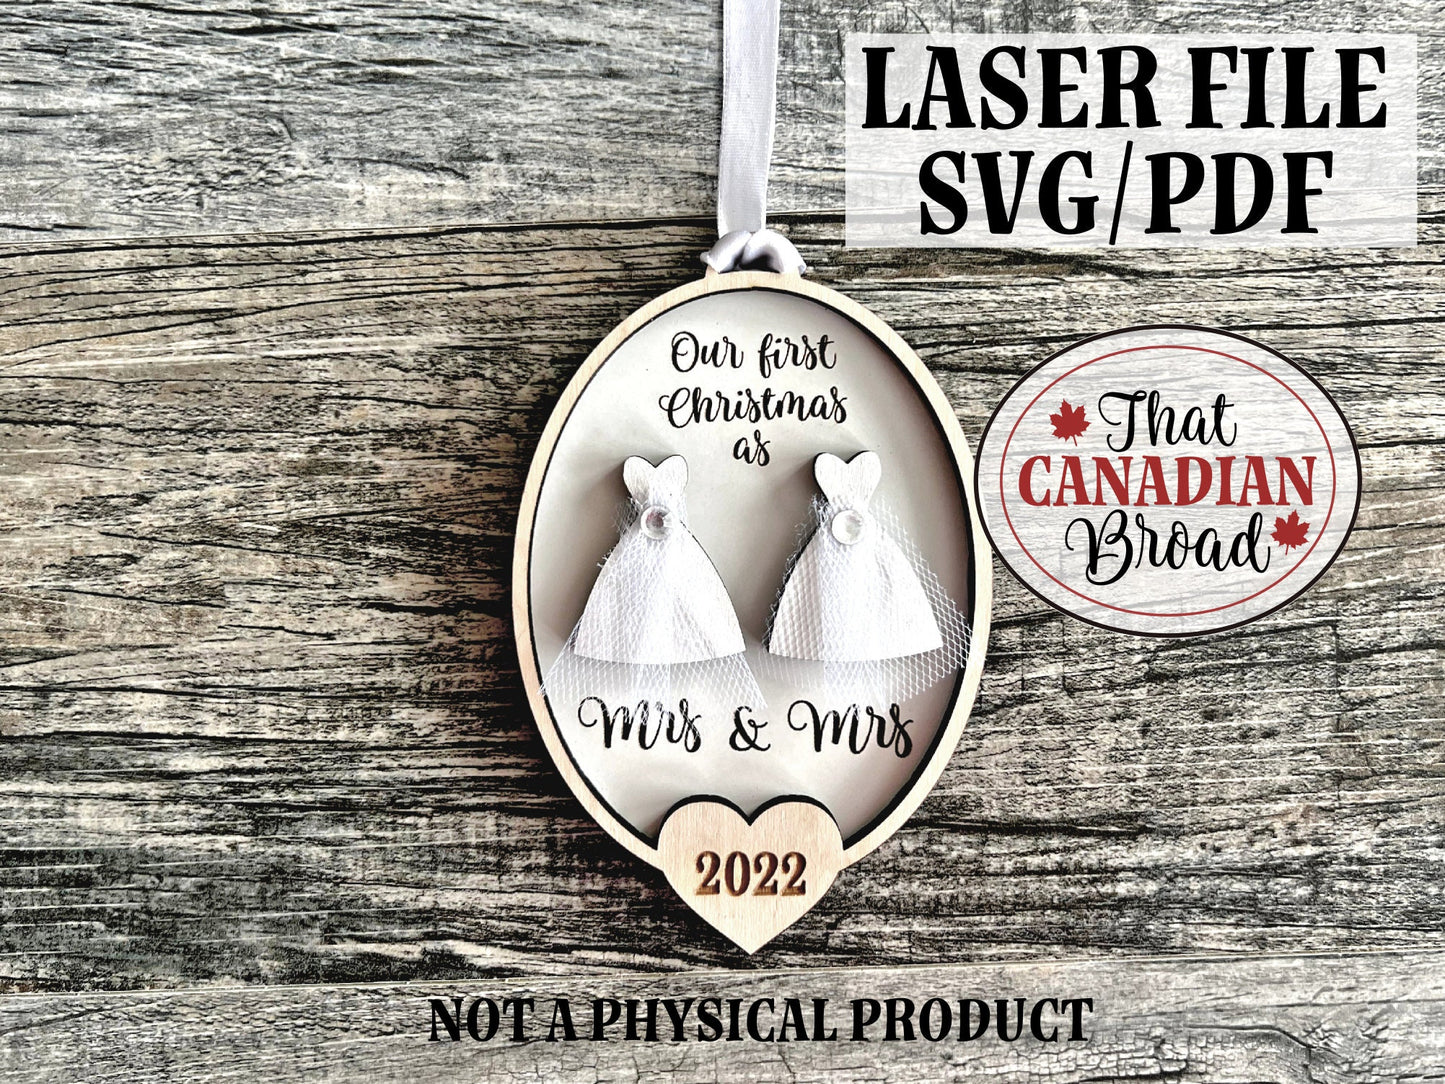 First Christmas Mr & Mrs, ornament 2022-2030, includes Mr and Mr, Mrs and Mrs, laser file, same sex ornaments, svg, pdf, digital file only